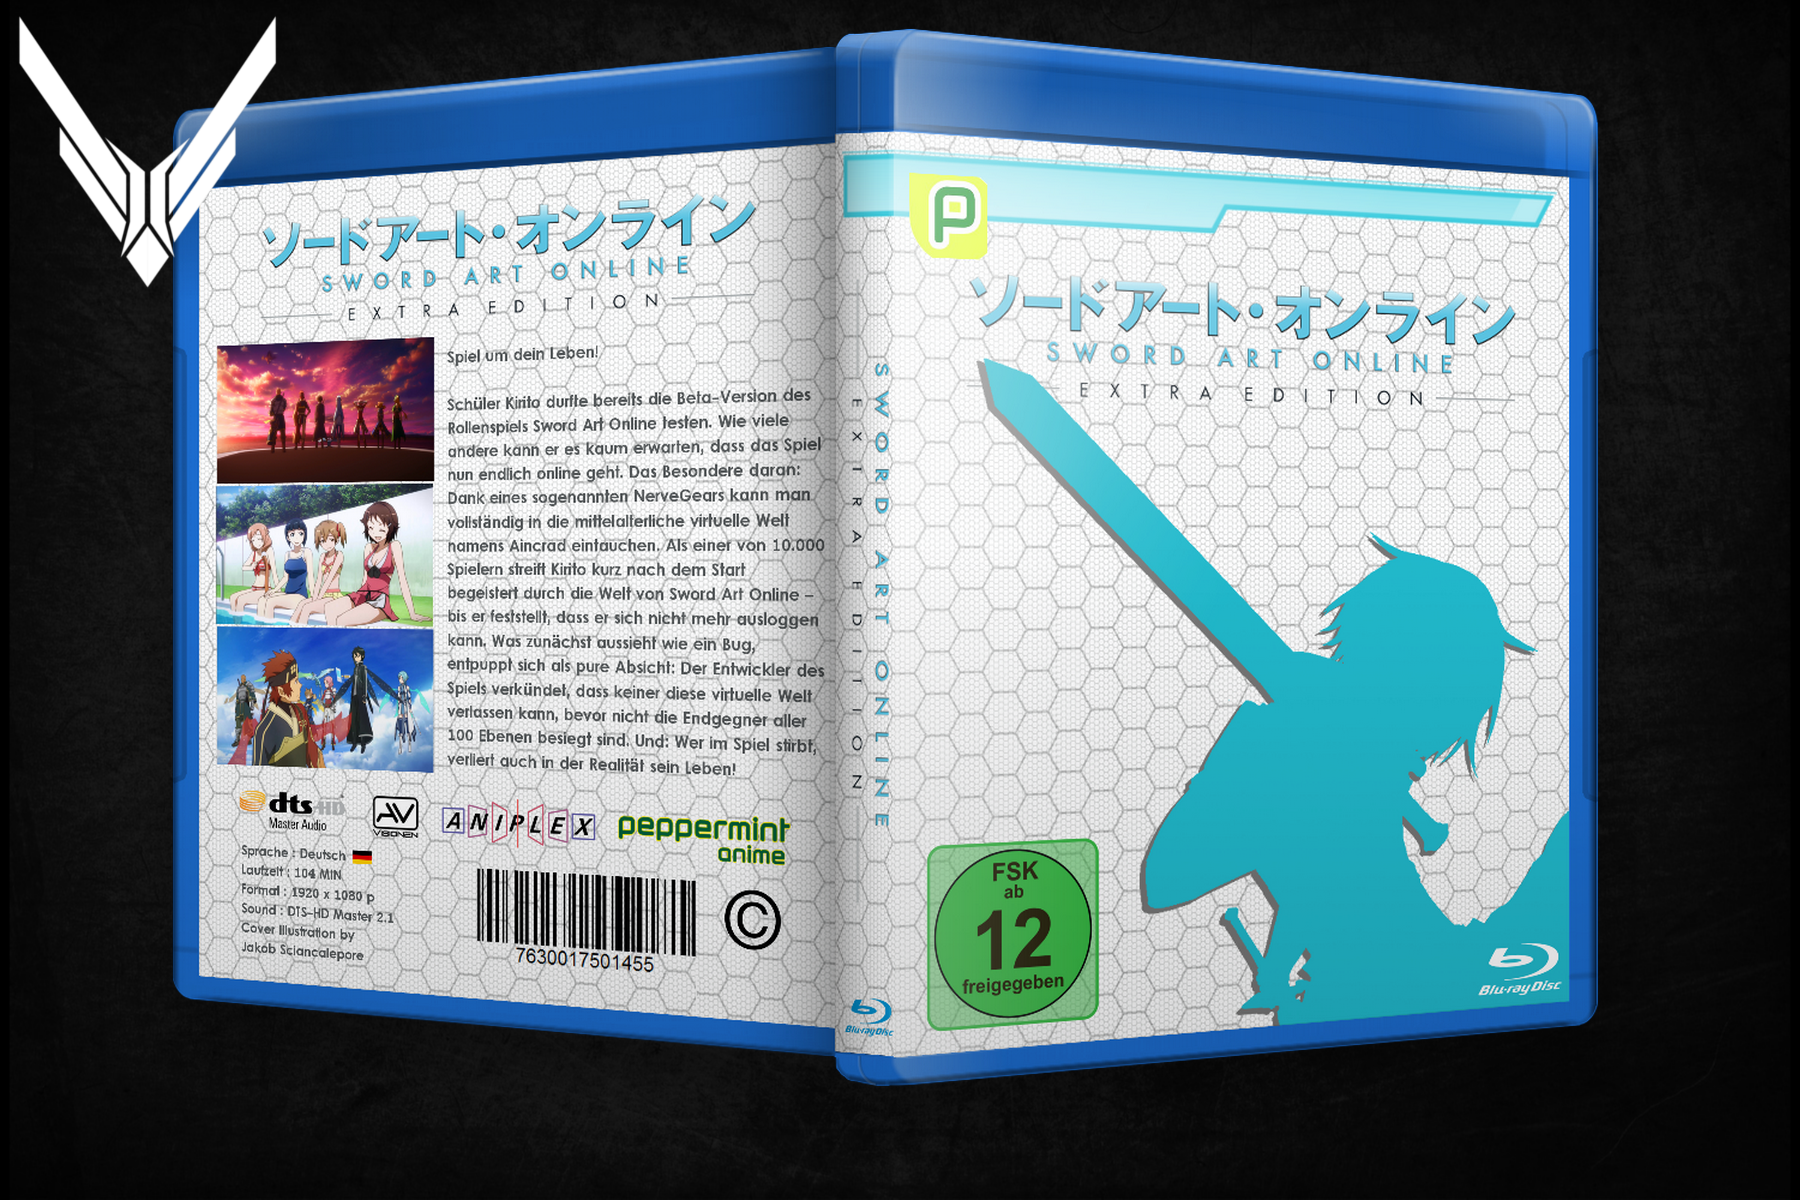 Sword Art Online extra edition box cover